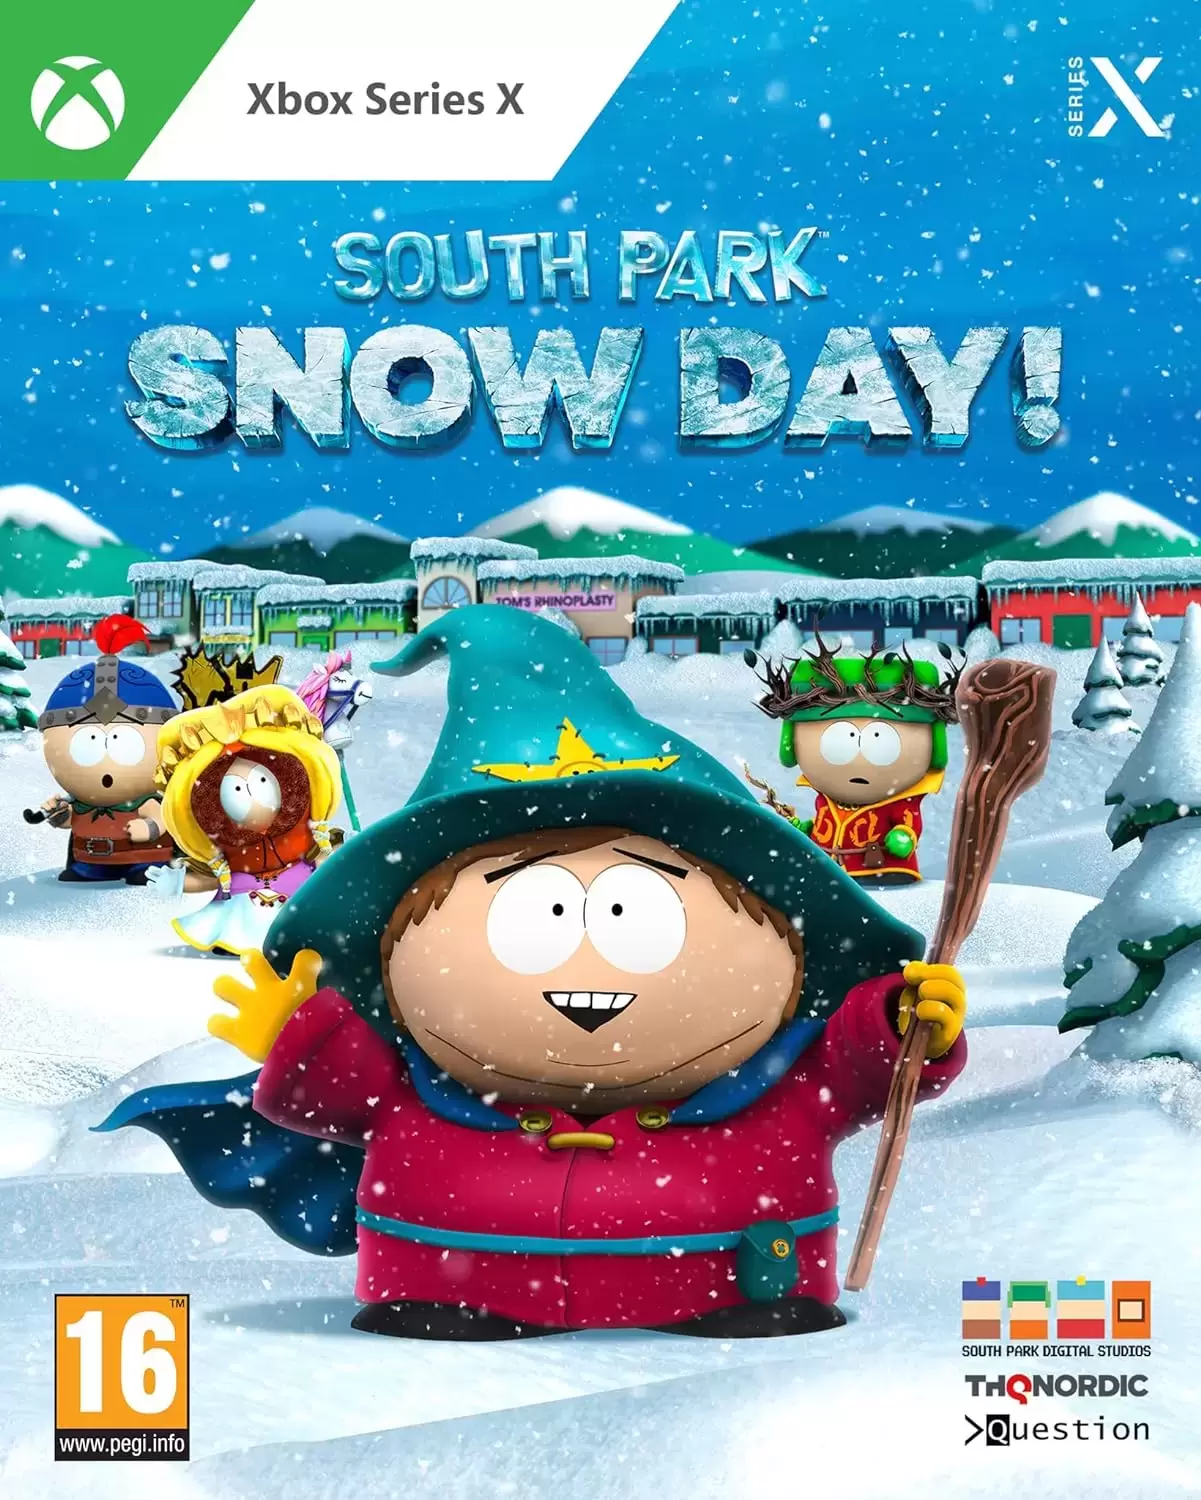 XBOX Series X Games - South Park : Snow Day!